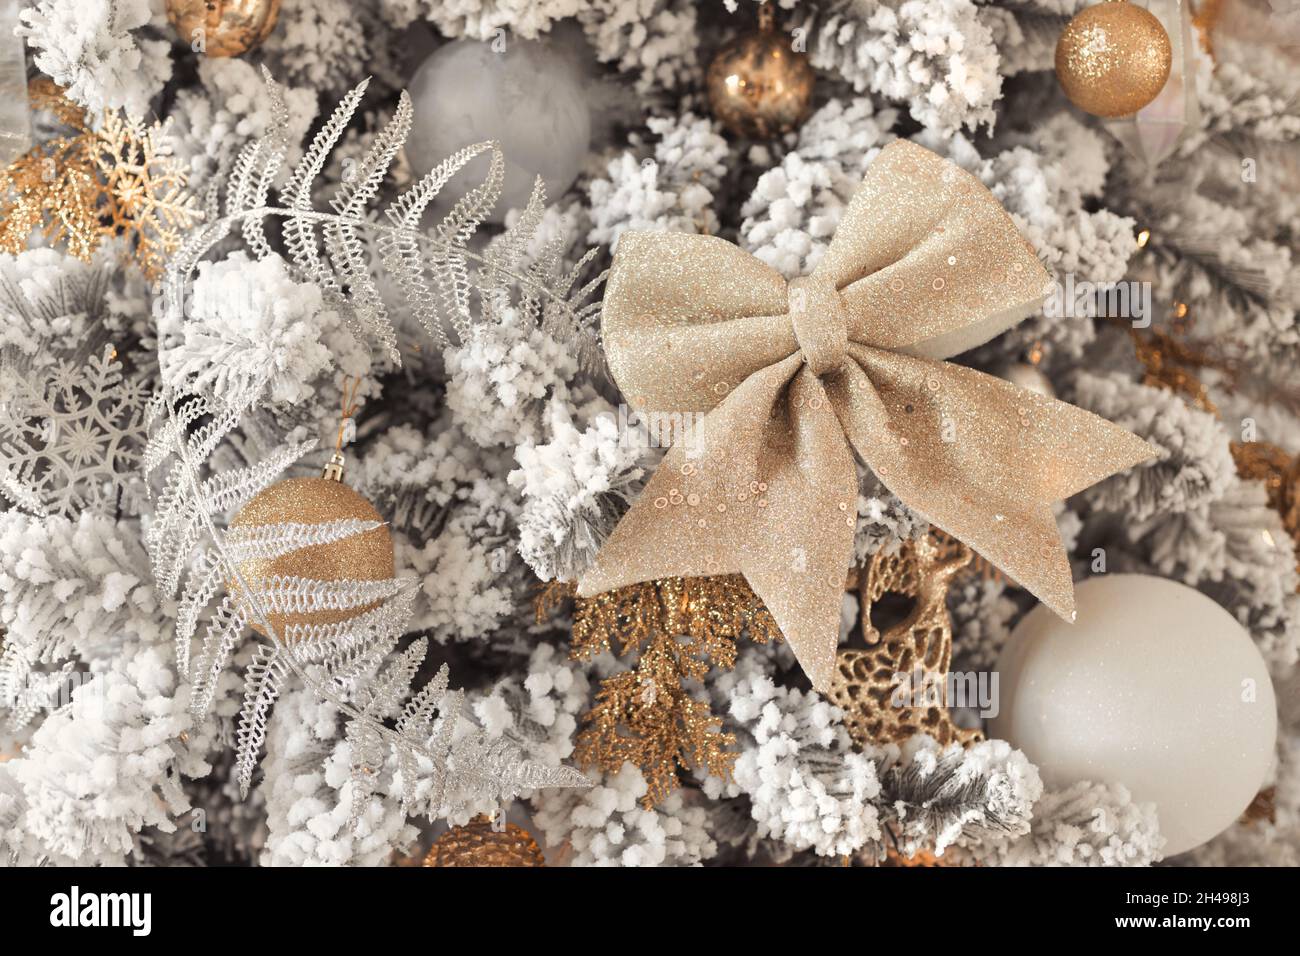 Close up photo of toy balls in silver and gold on luxury snowy Christmas tree with big golden bow Stock Photo